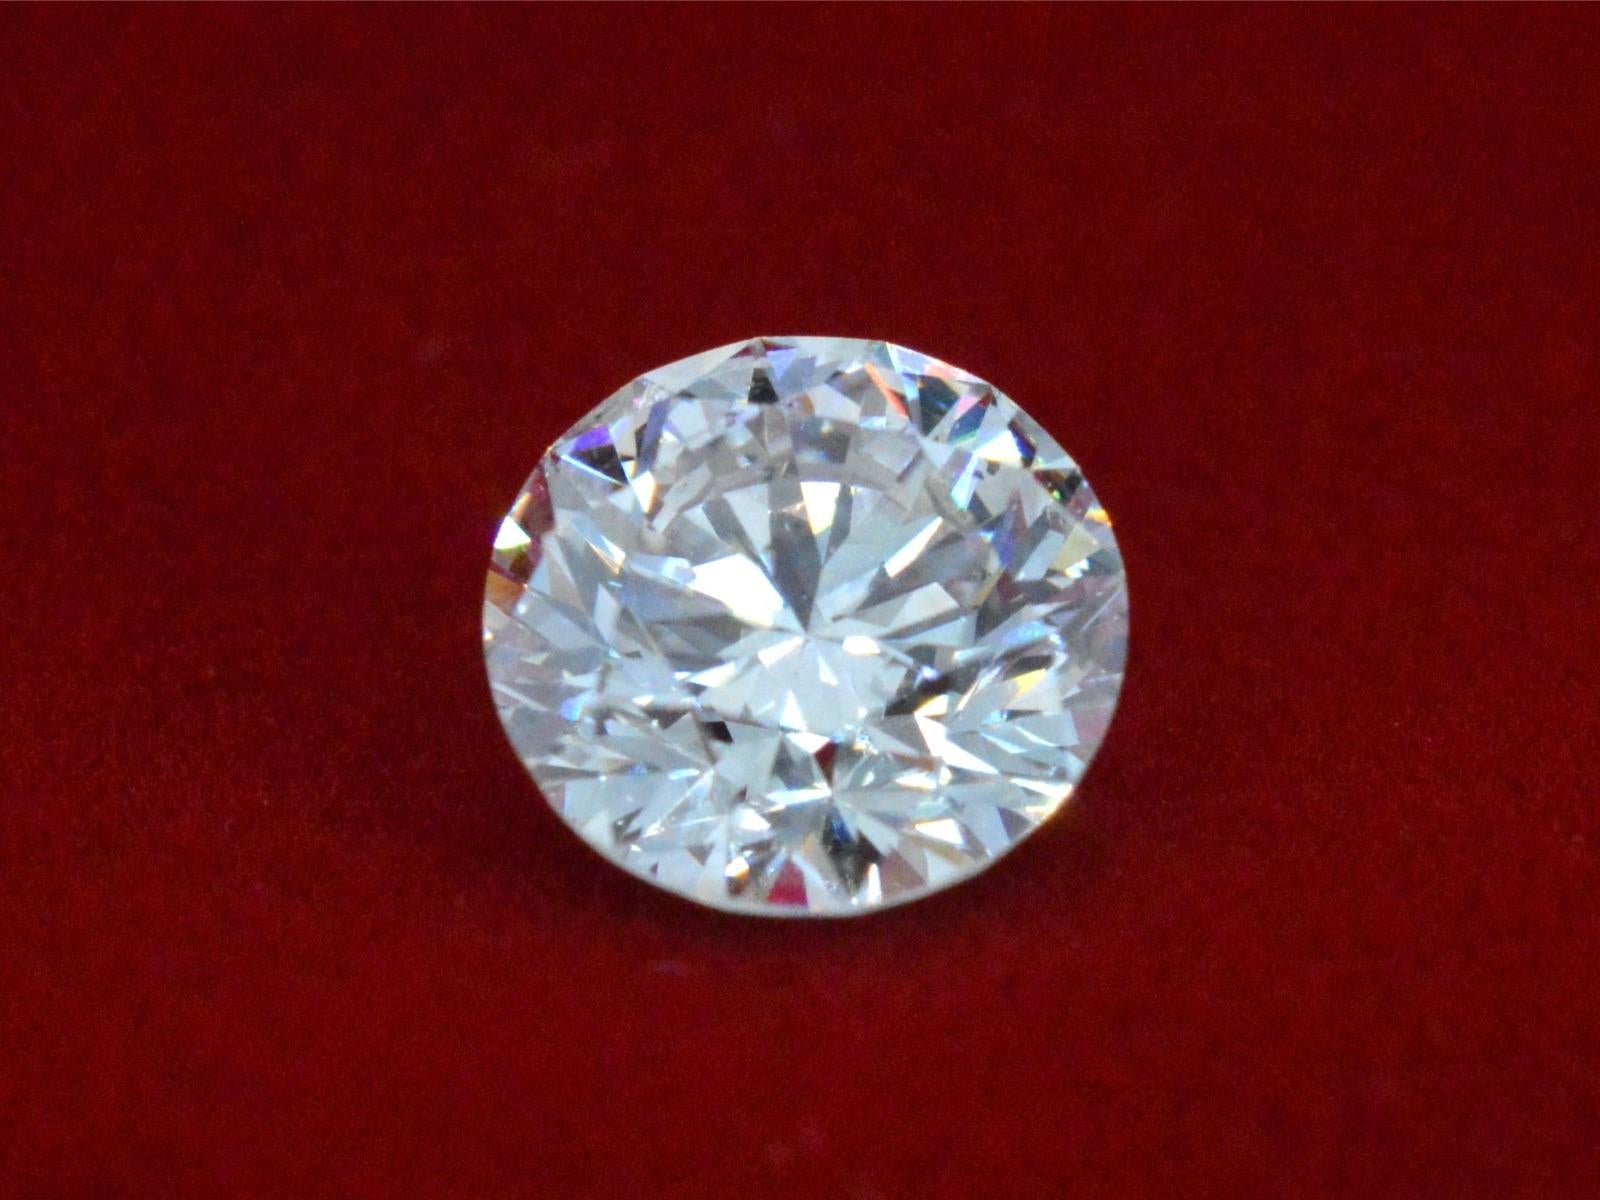 Quantity: 1
 Product Name: 0.60 Carat Natural Starcut Diamond with Laser Engraved
 Brand: Starcut
 Cut shape: Brilliant cut modified
 Weight: 0.60 carat
 Colour: I
 Purity: VVS1
 Packaging: IGI sealed
 Certificate number: 499102323.
Retail value: €